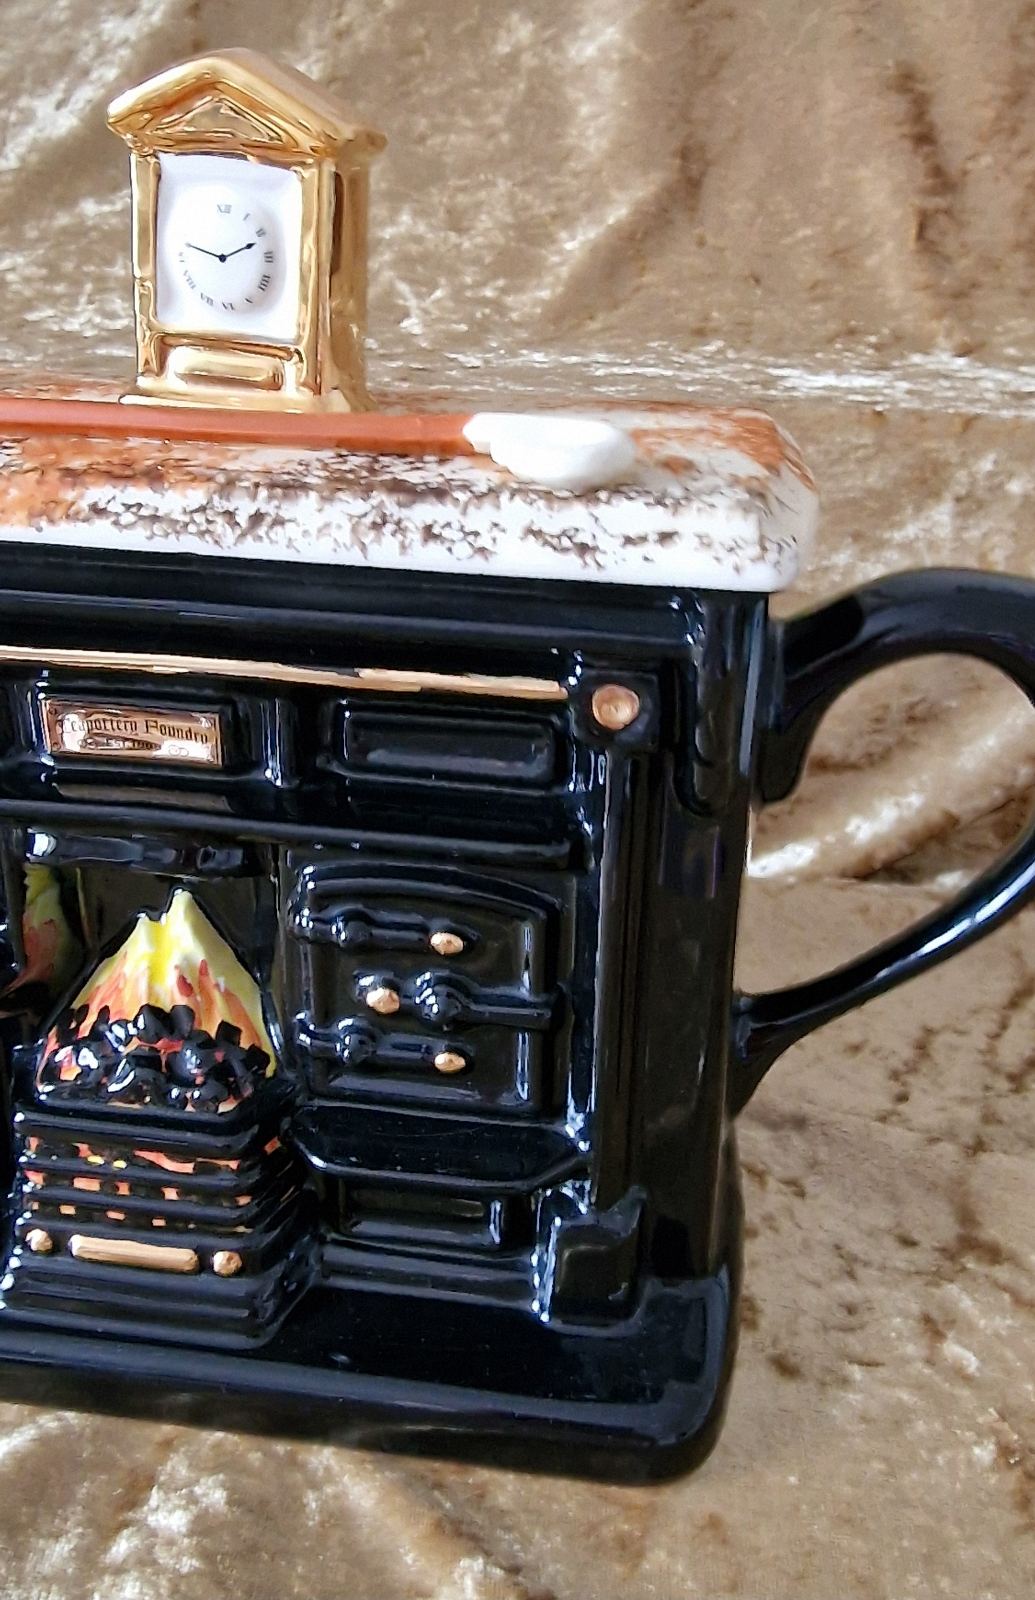 Unique black teapot with fireplace and clock, a prized collectible from Teapottery Company in Yorkshire.